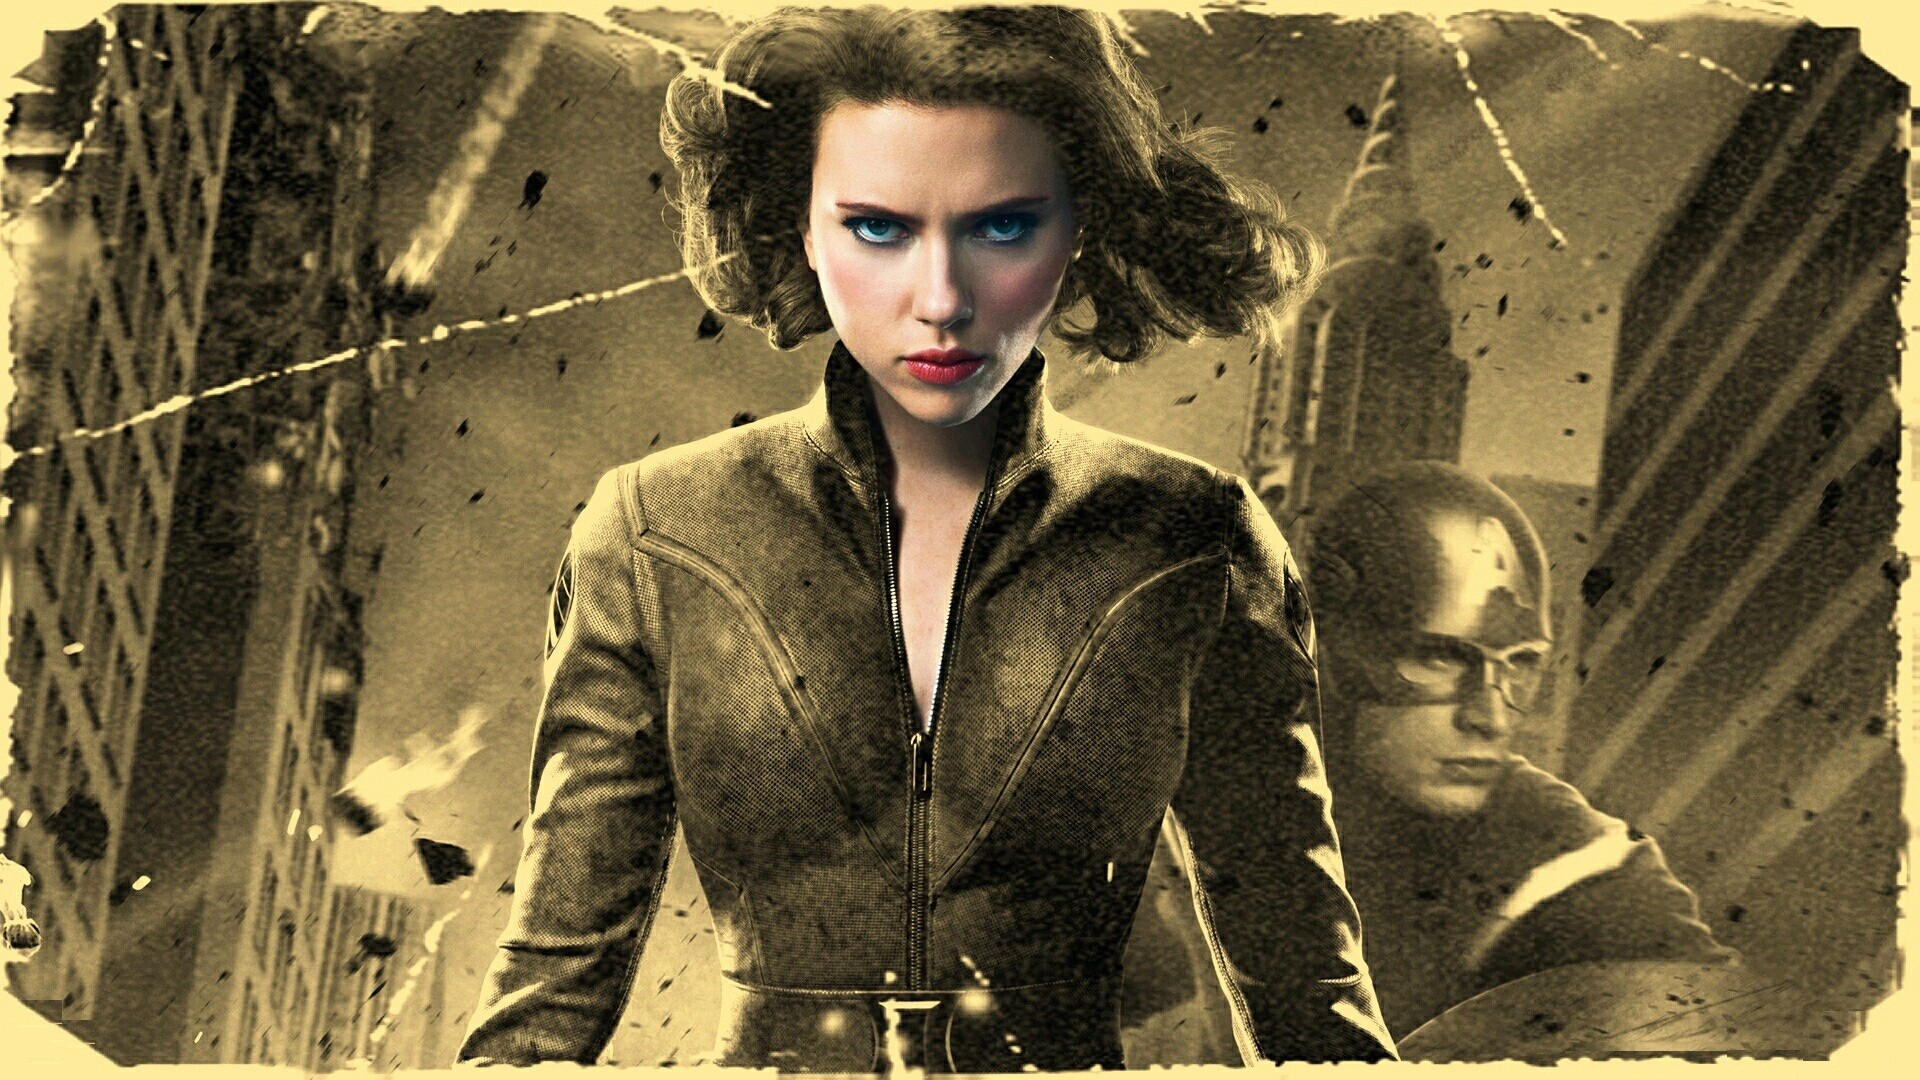 General 1920x1080 movies The Avengers Captain America Black Widow sepia selective coloring filter Scarlett Johansson Marvel Cinematic Universe women red lipstick looking at viewer actress American women superhero superheroines Marvel Comics